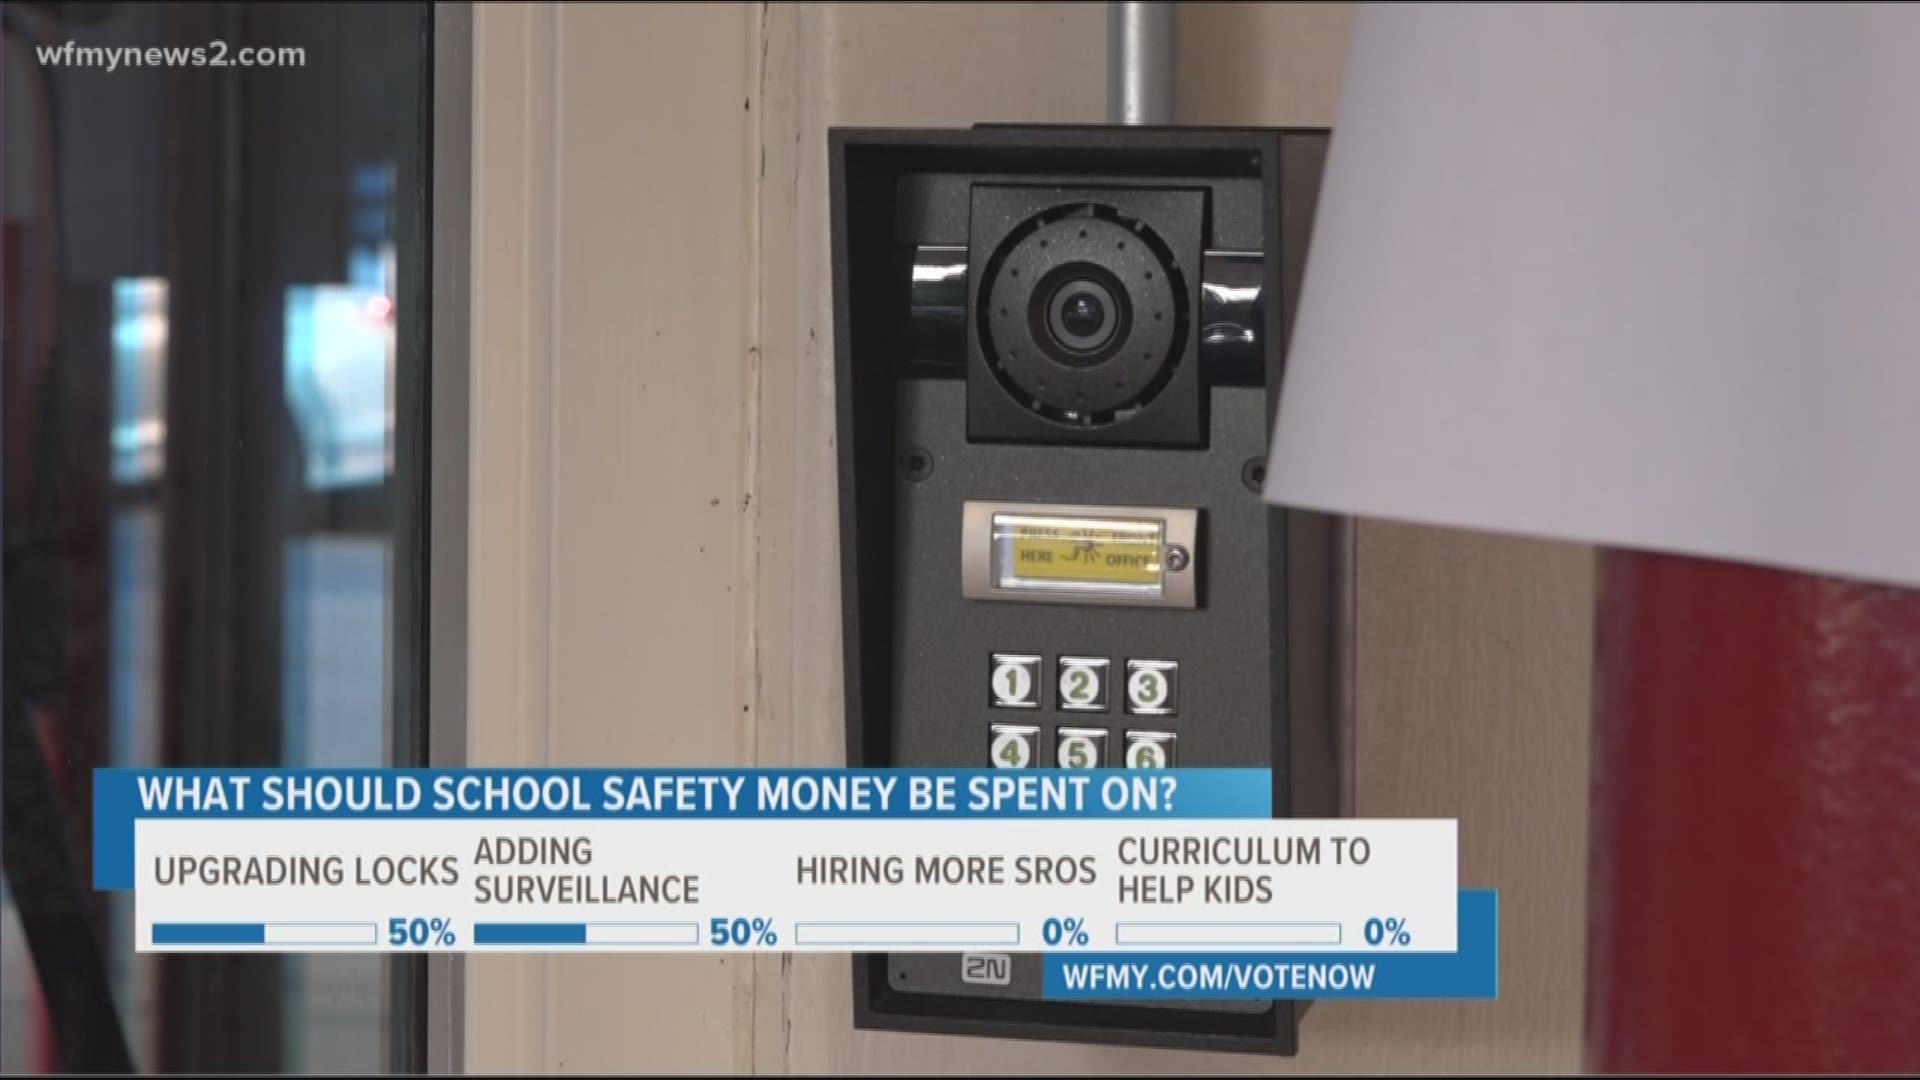 Guilford County Schools will request $10 million that would go directly toward security improvements at all of their schools.